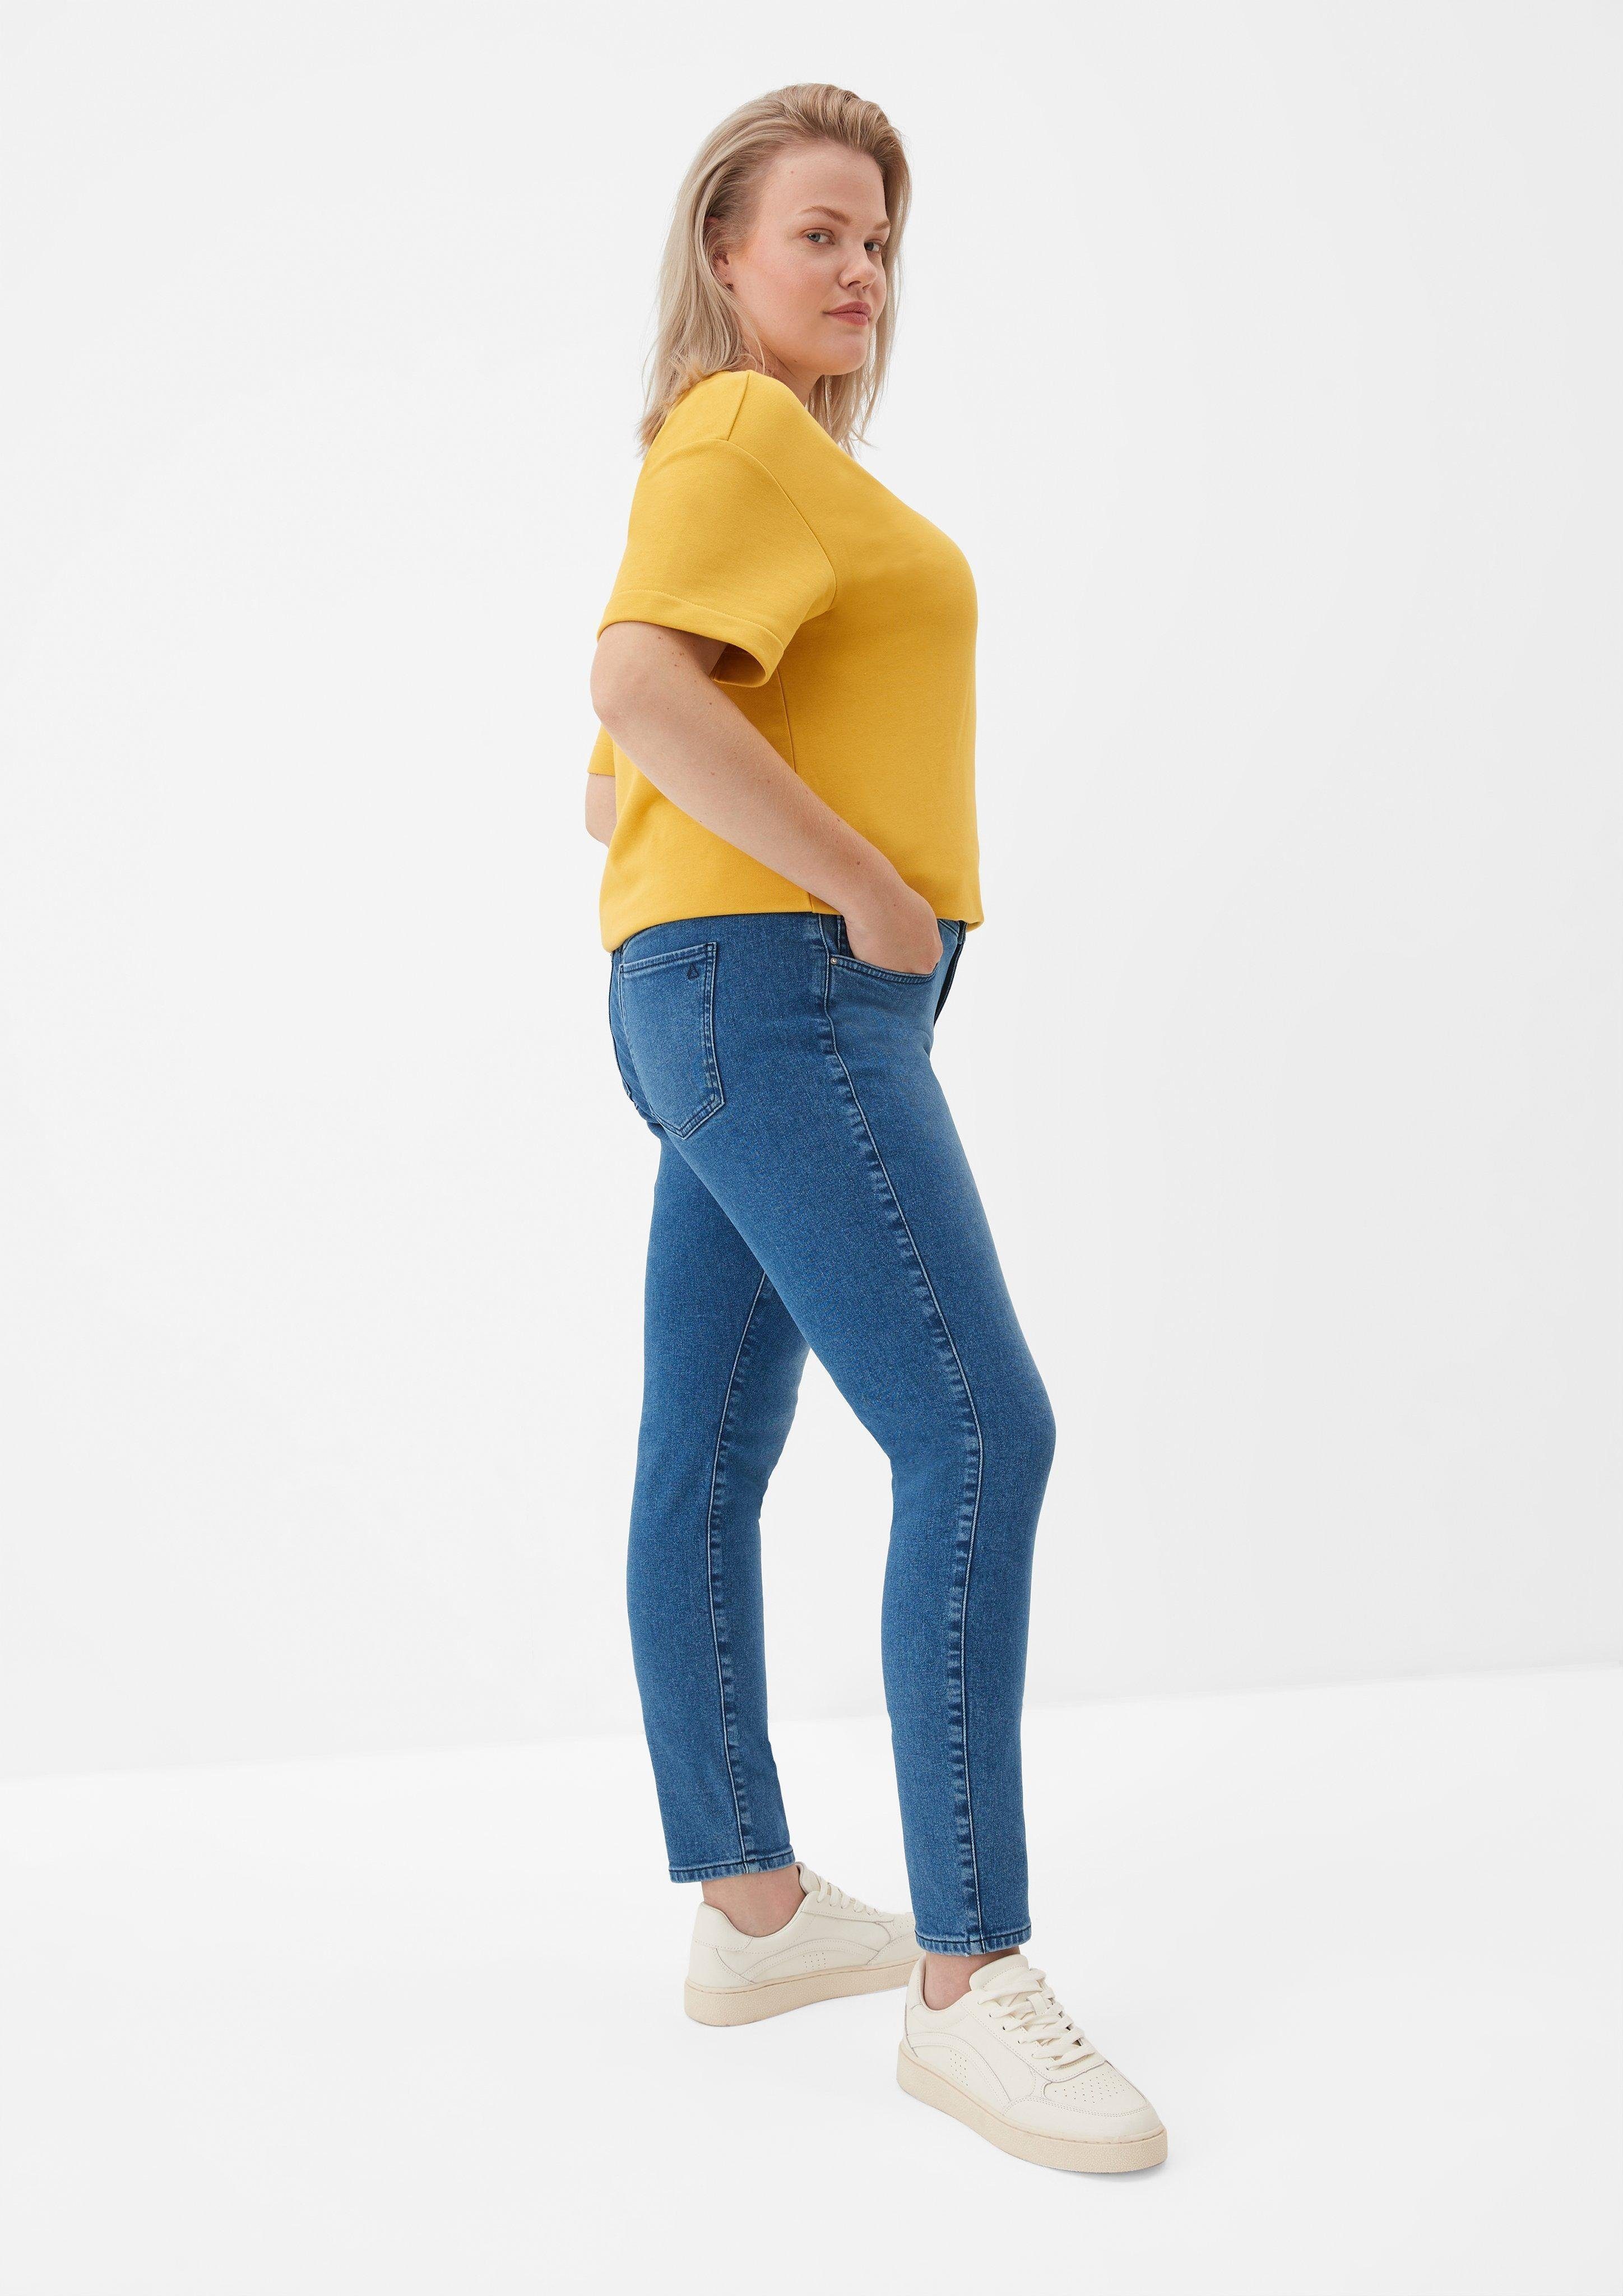 TRIANGLE Bequeme Jeans Skinny: Stretchjeans mit Waschung Garment Dye